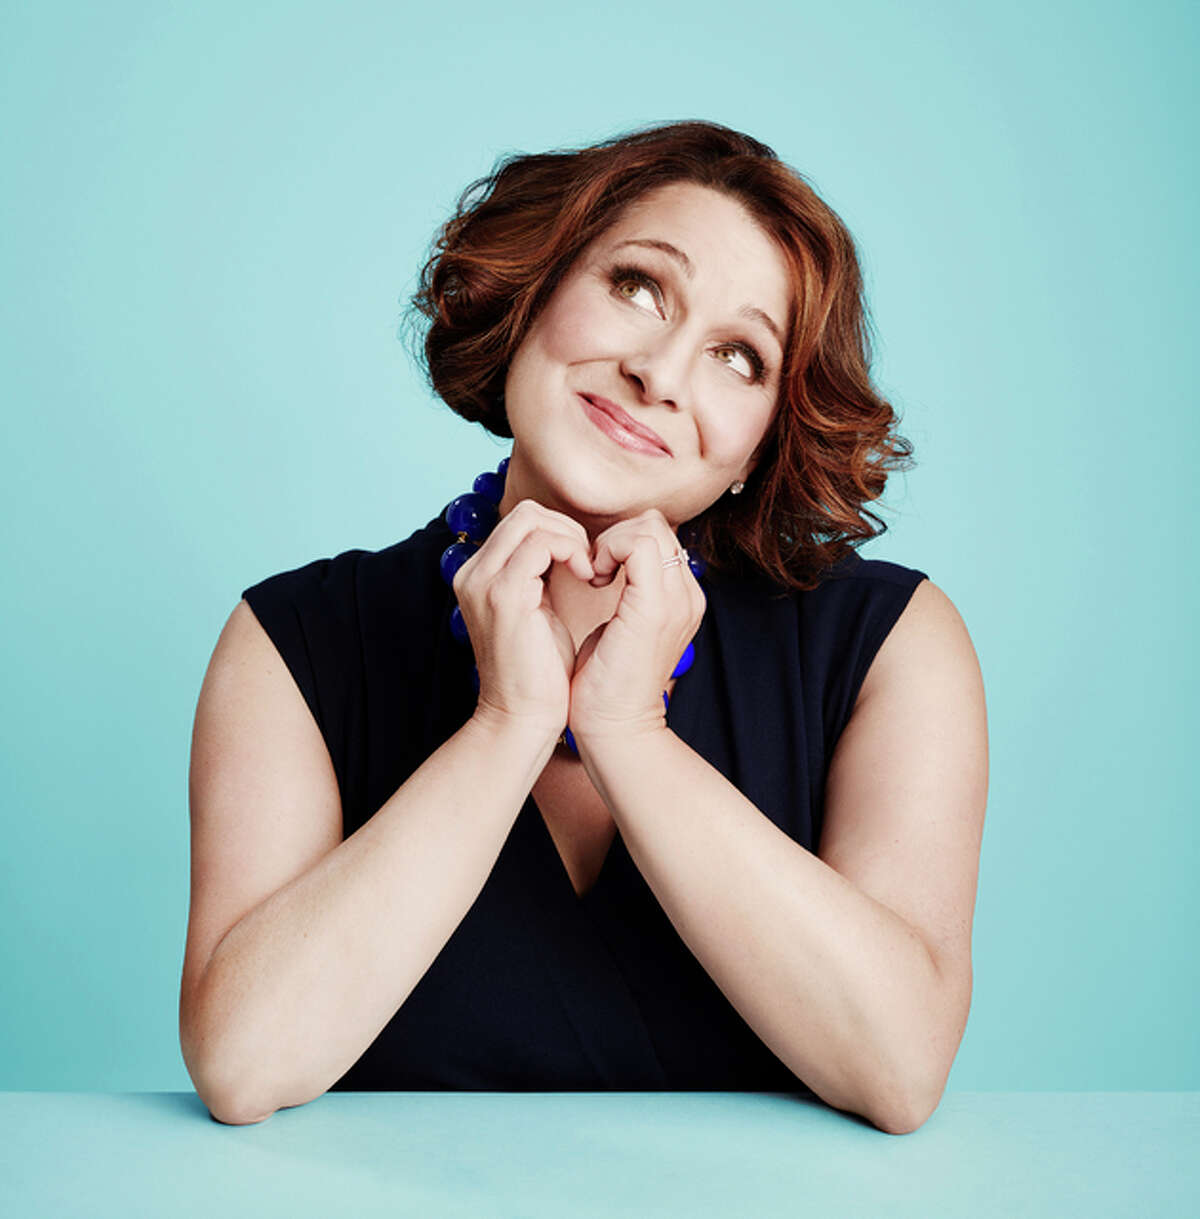 Jennifer Weiner, author of “Hungry Heart, Adventures in Life, Love, and Writing” will speak about her book and sign copies on Wednesday, Oct. 19, at the Jewish Community Center/Staenberg Family Complex as part of the annual St. Louis Jewish Book Festival.